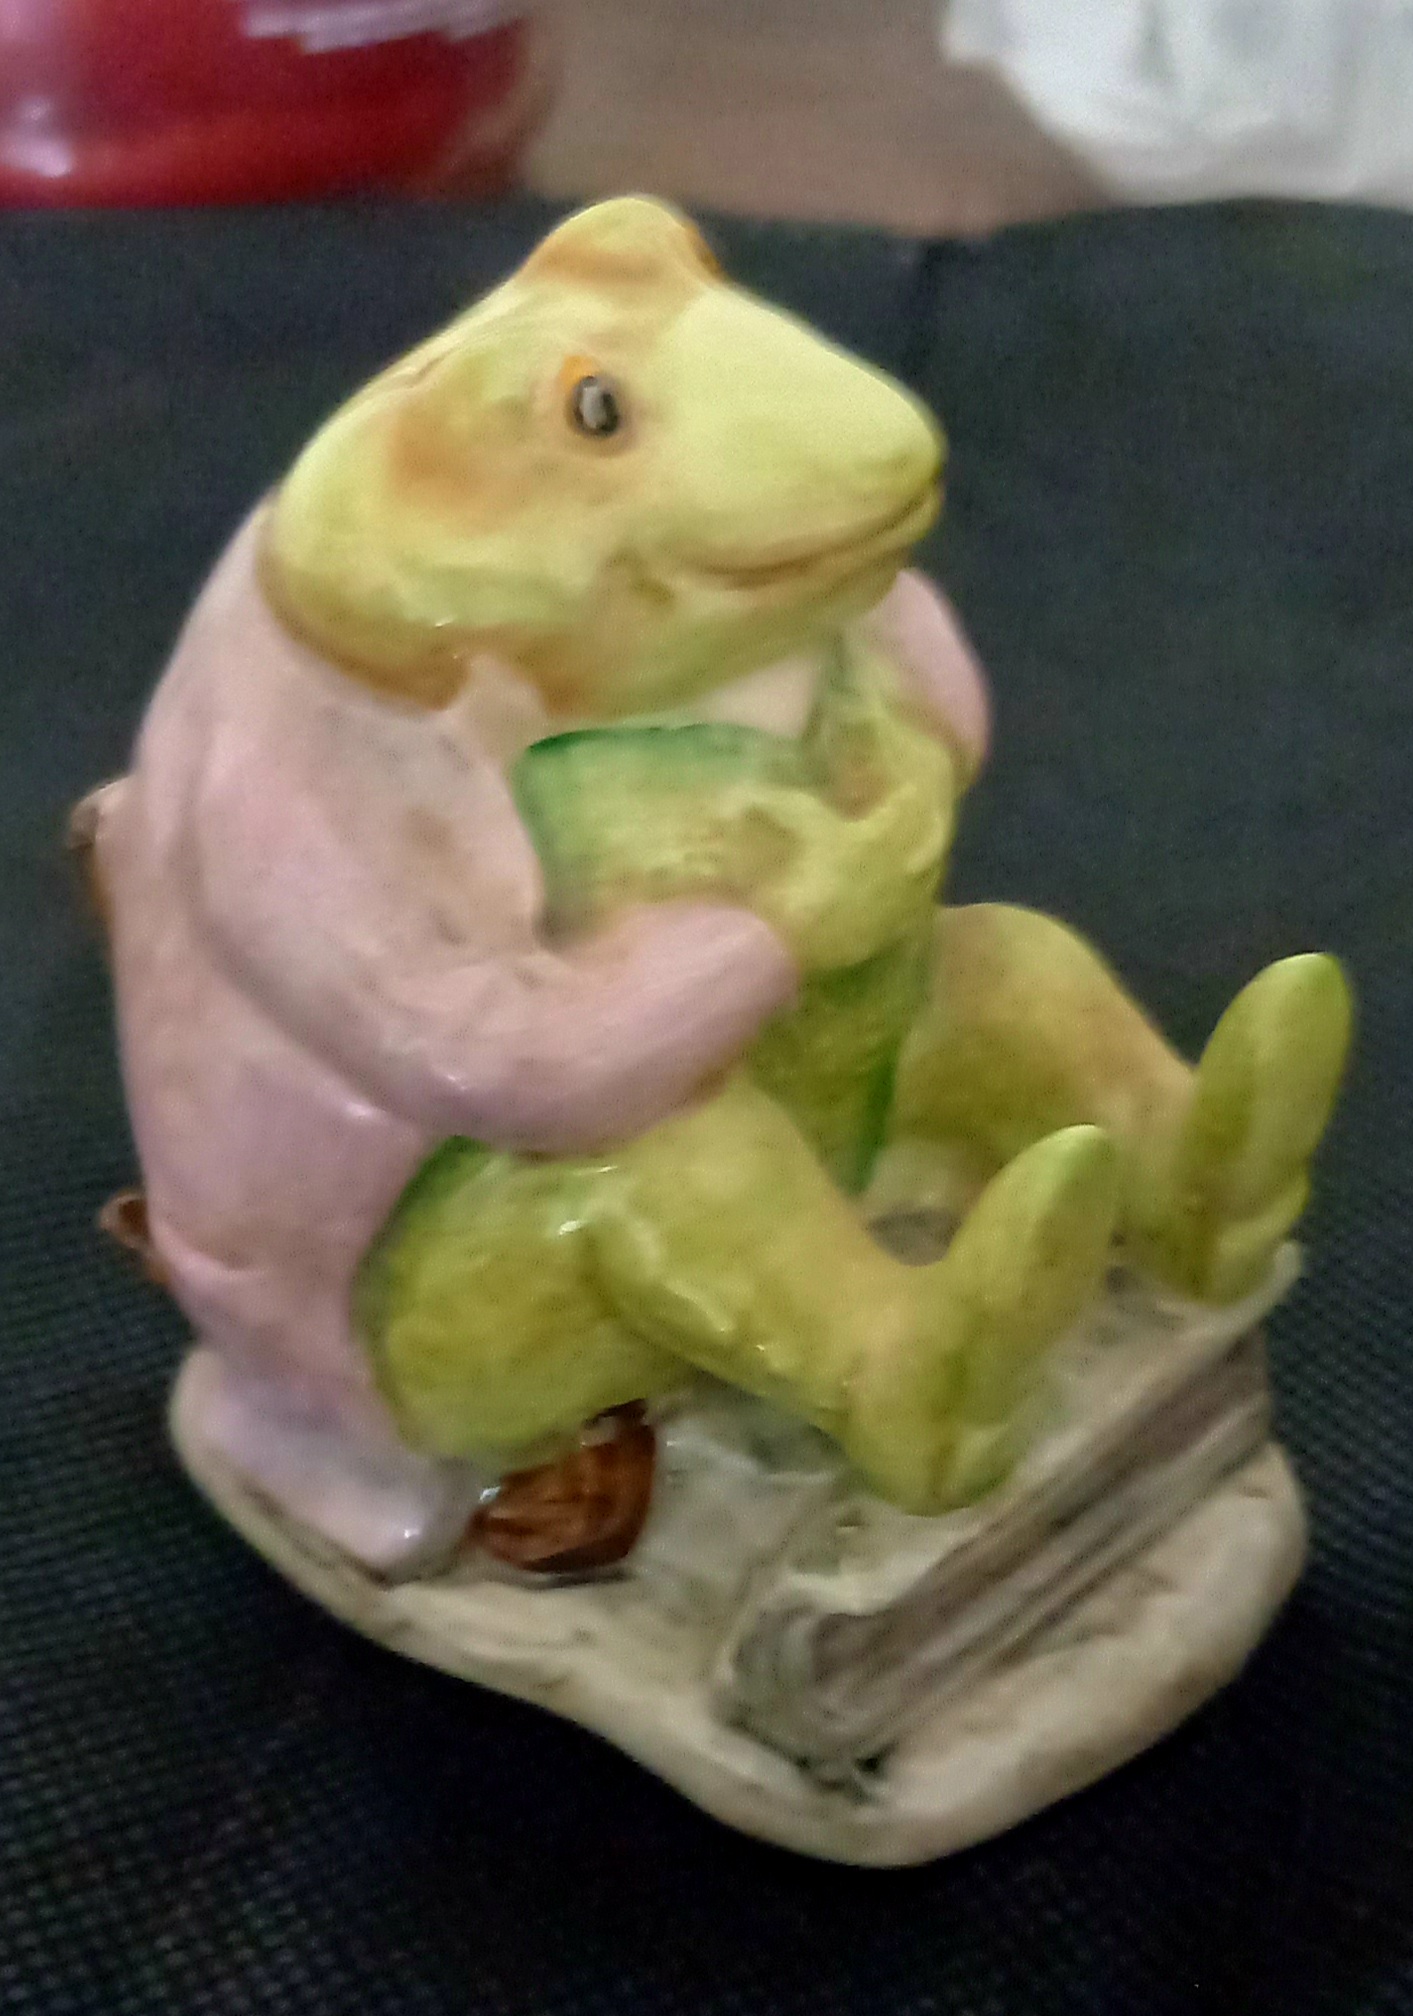 Scarce Beswick Beatrix Potter Figure 'Mr Jackson' BP3A, Issued 1974 Only. - Image 3 of 4